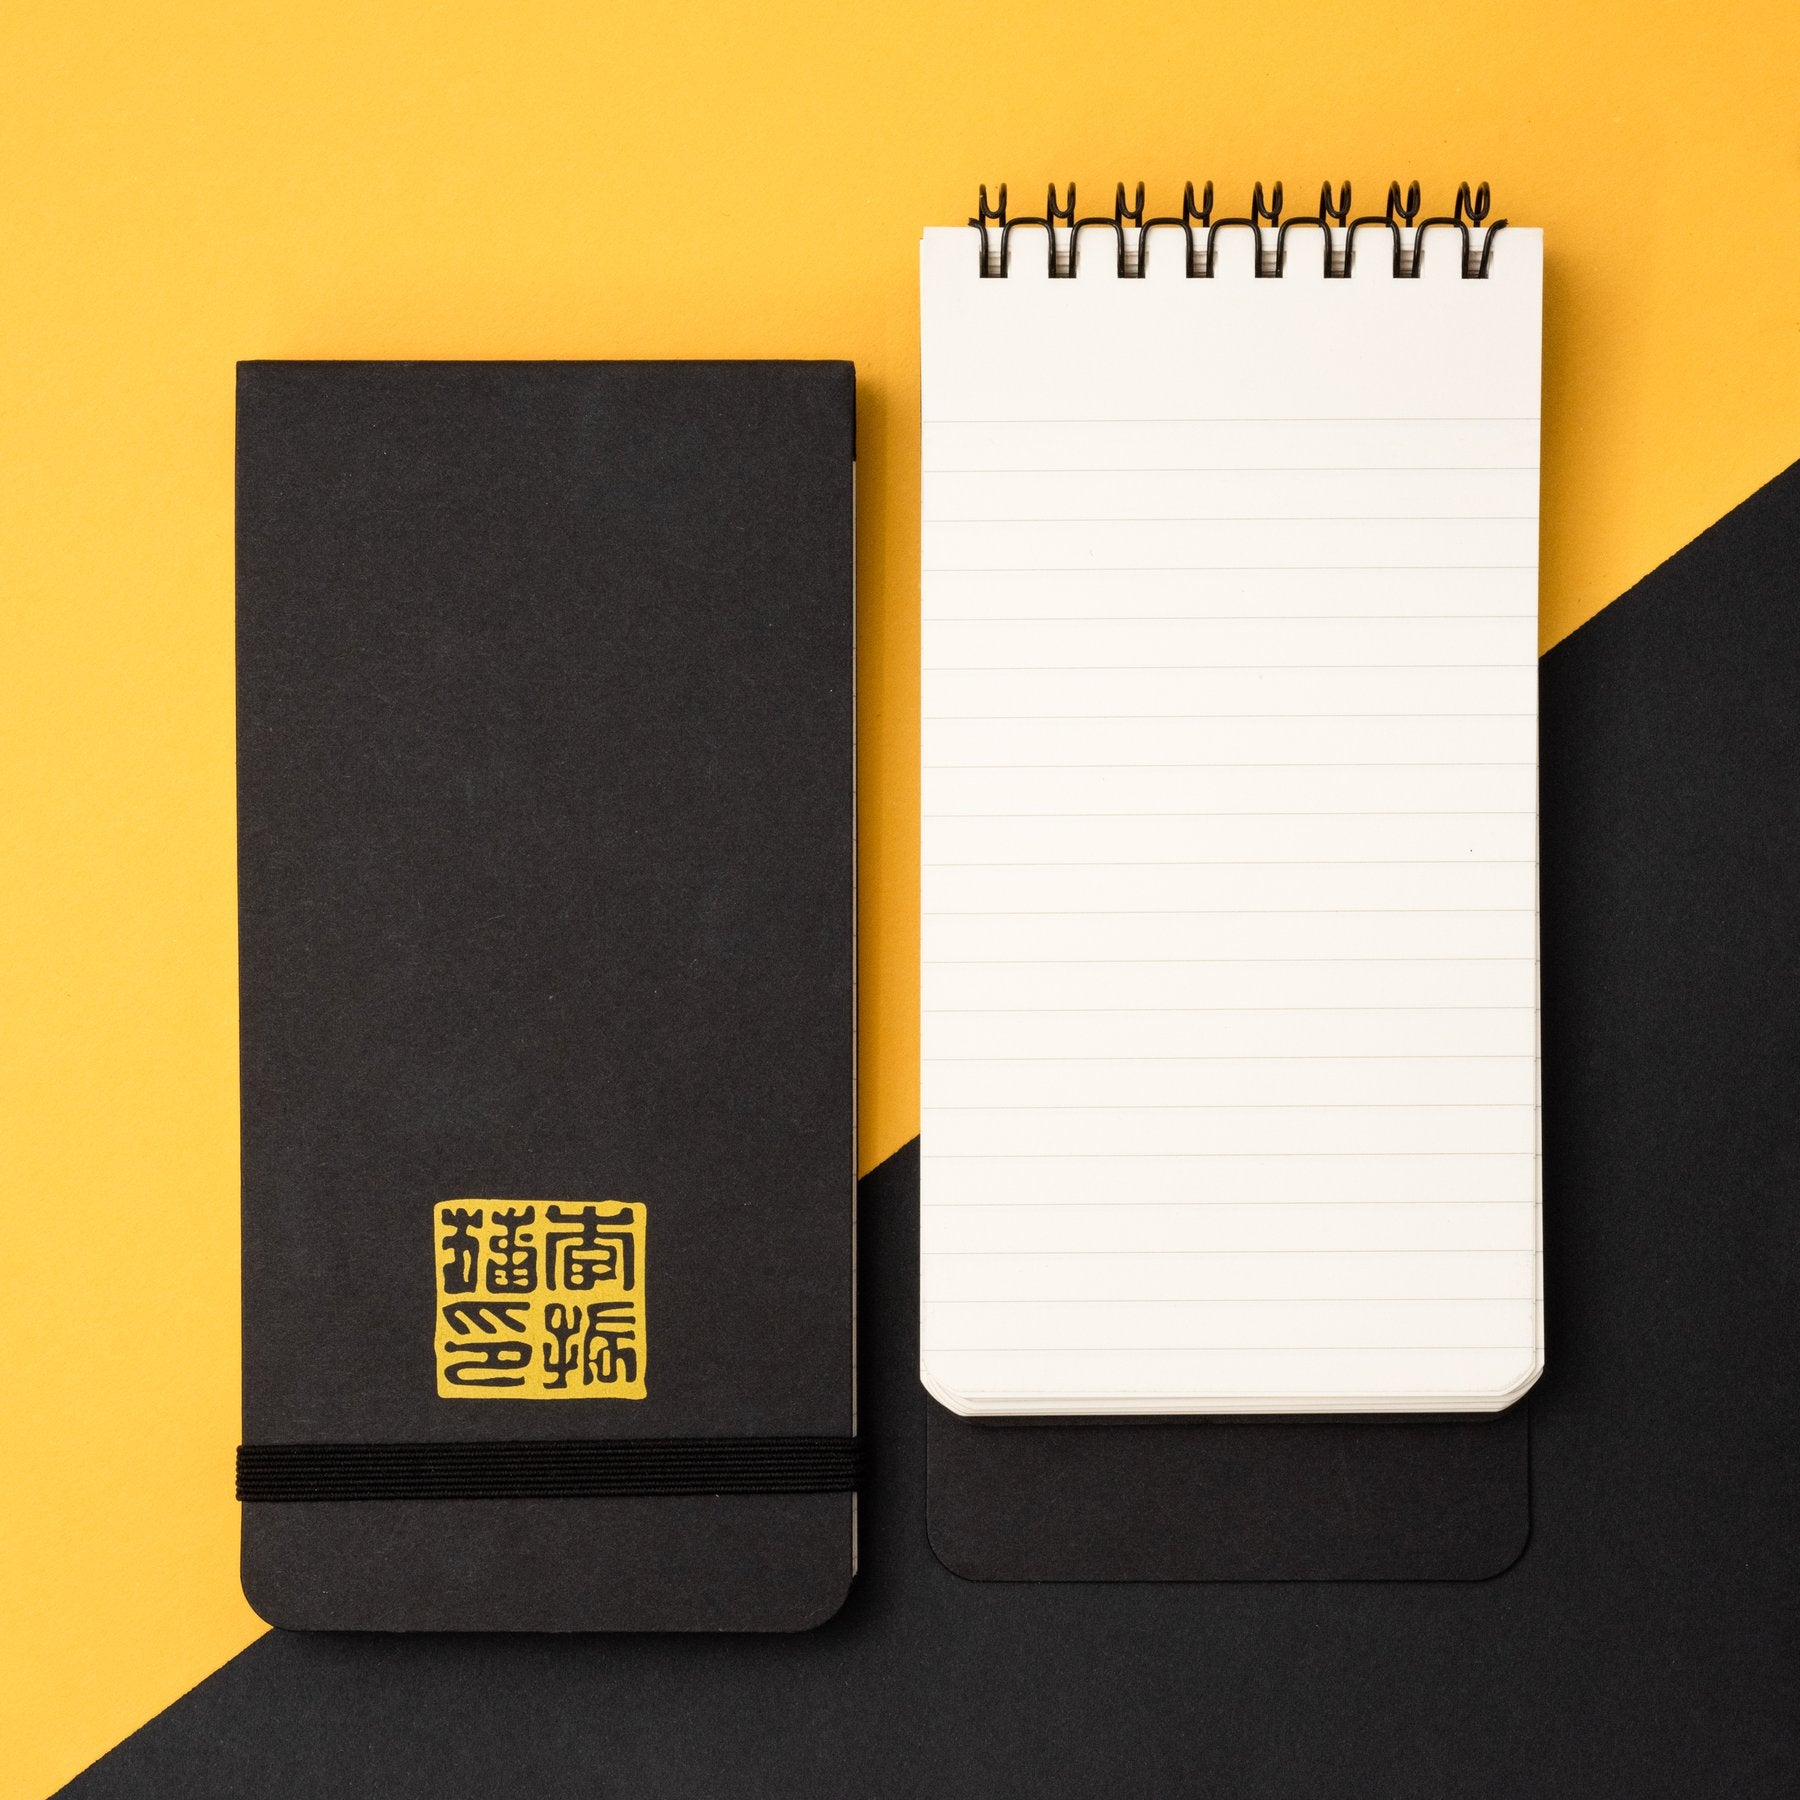 A closed Blackwing Volume 651- Tribute to Bruce Lee notebook with gold lettering next to an open spiral Reporter Pads on a dual black and yellow background.